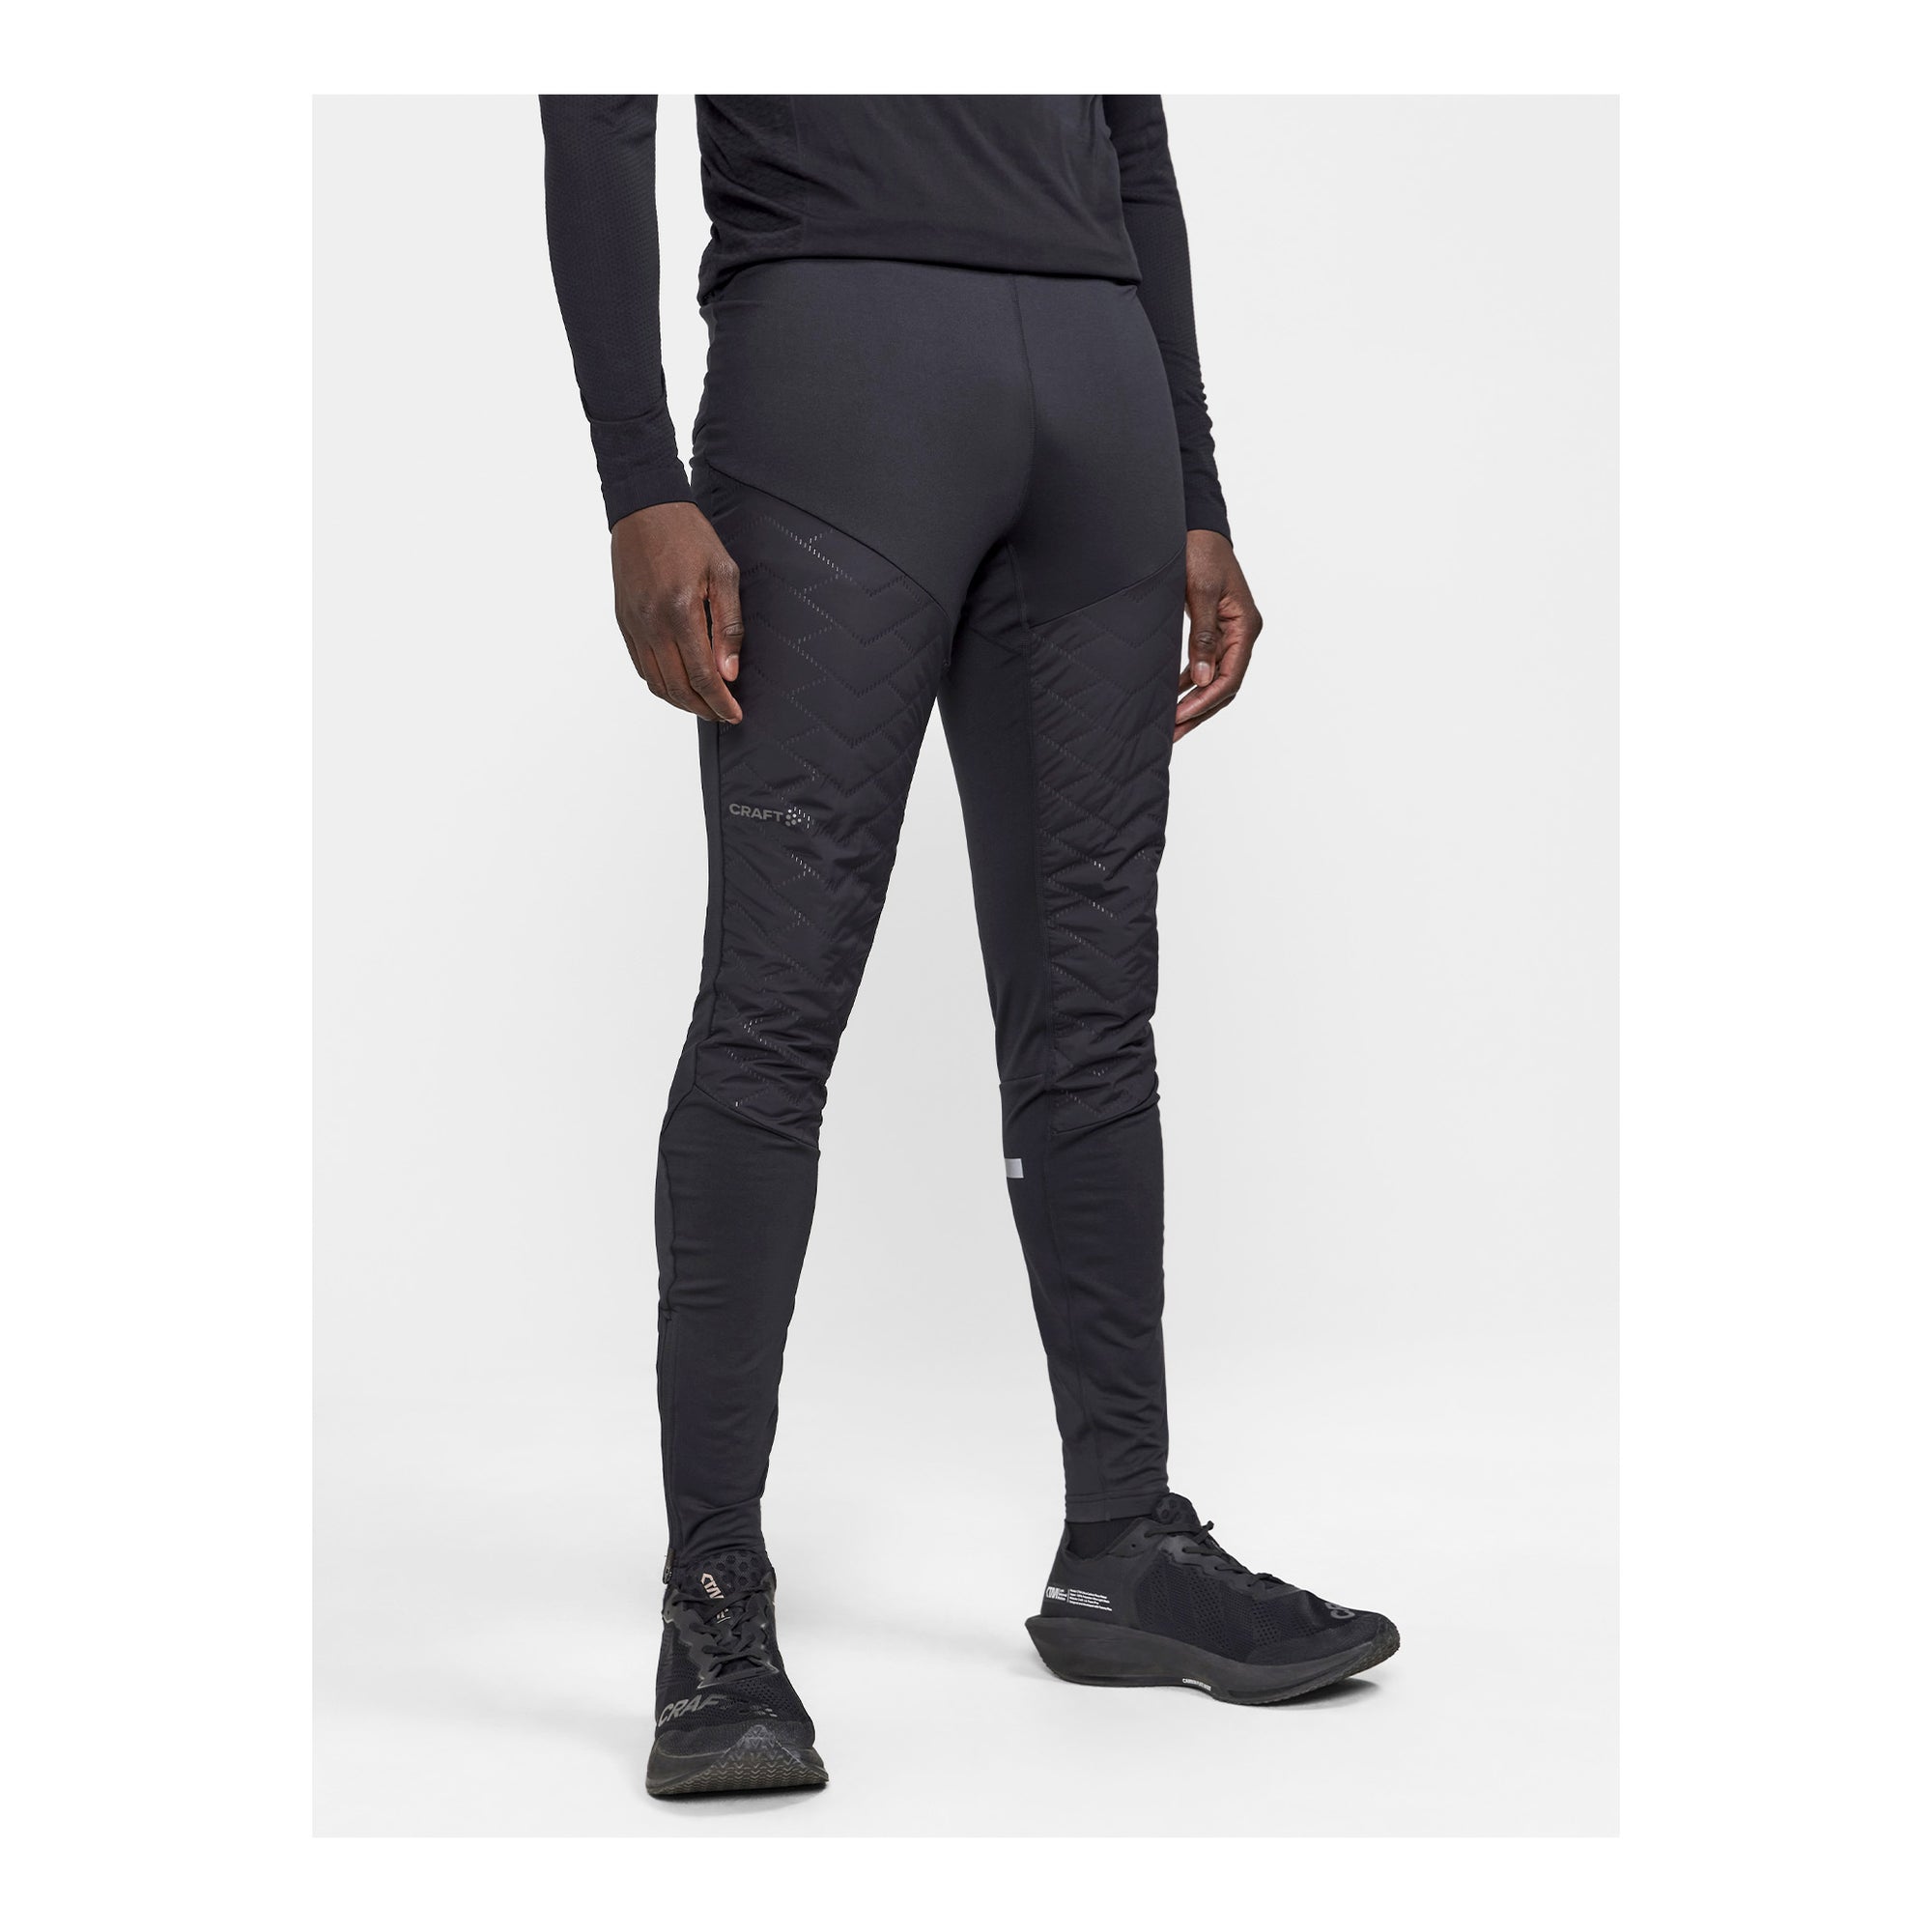 CRAFT ADV SUBZ TIGHTS 3 - HOMME